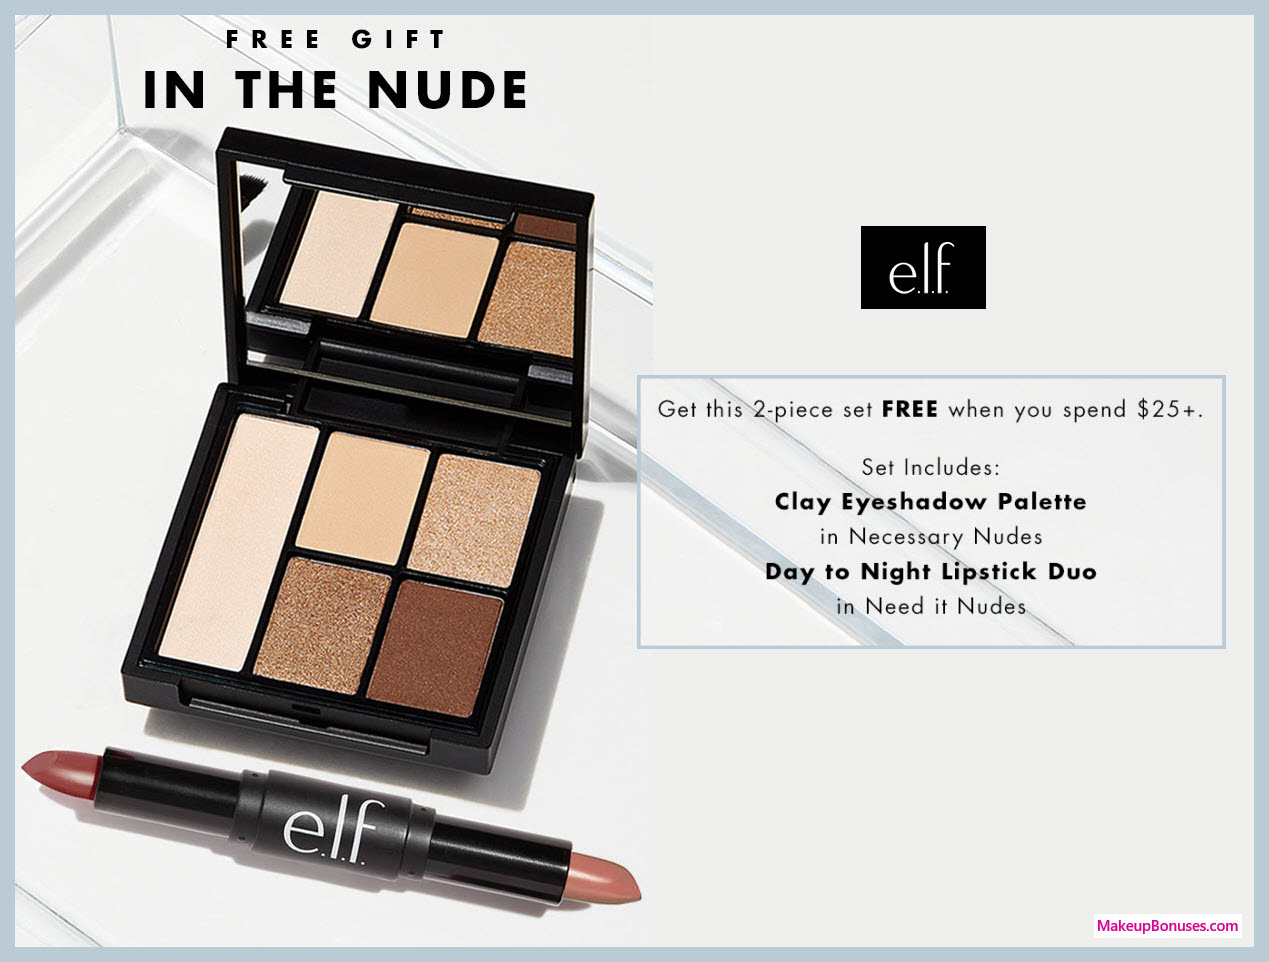 Receive a free 2-pc gift with $25 ELF Cosmetics purchase #elfcosmetics